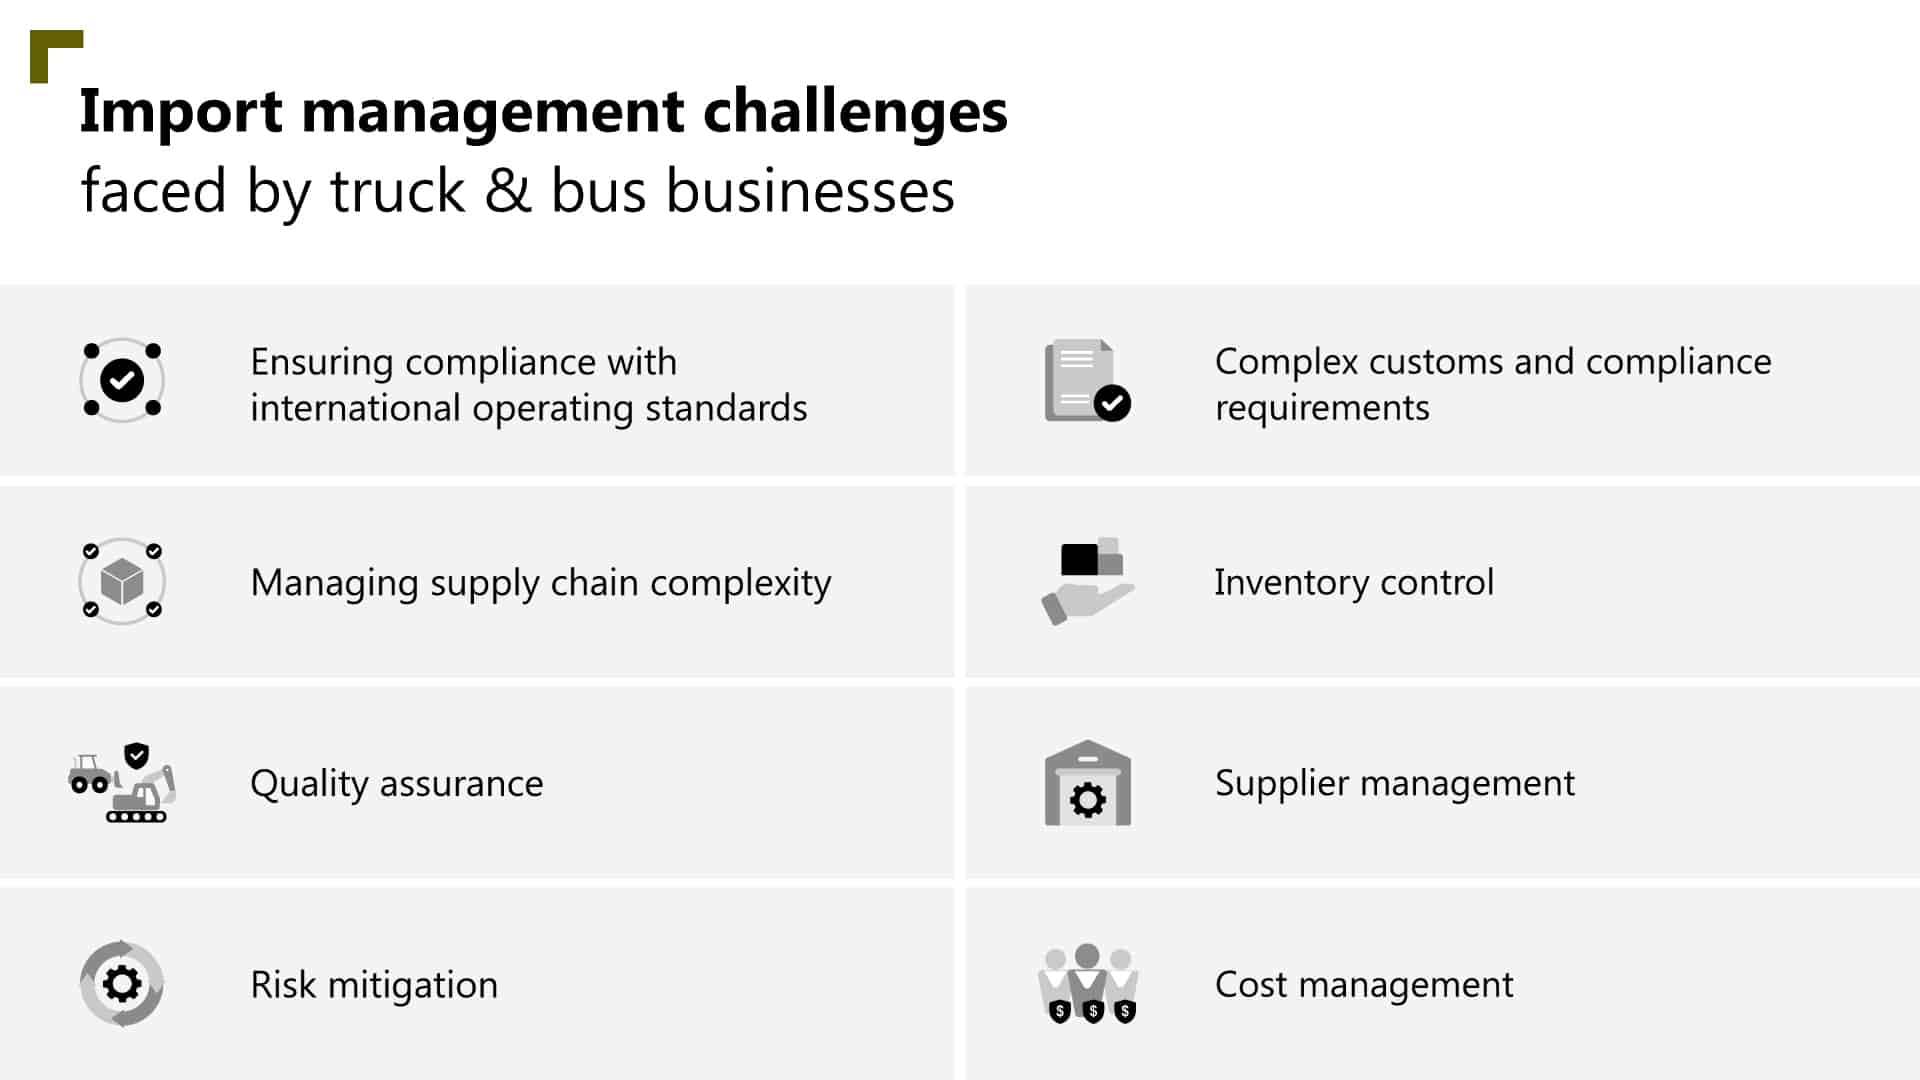 From complex processes to modernized control: Transforming import management in the truck & bus industry with A365  2